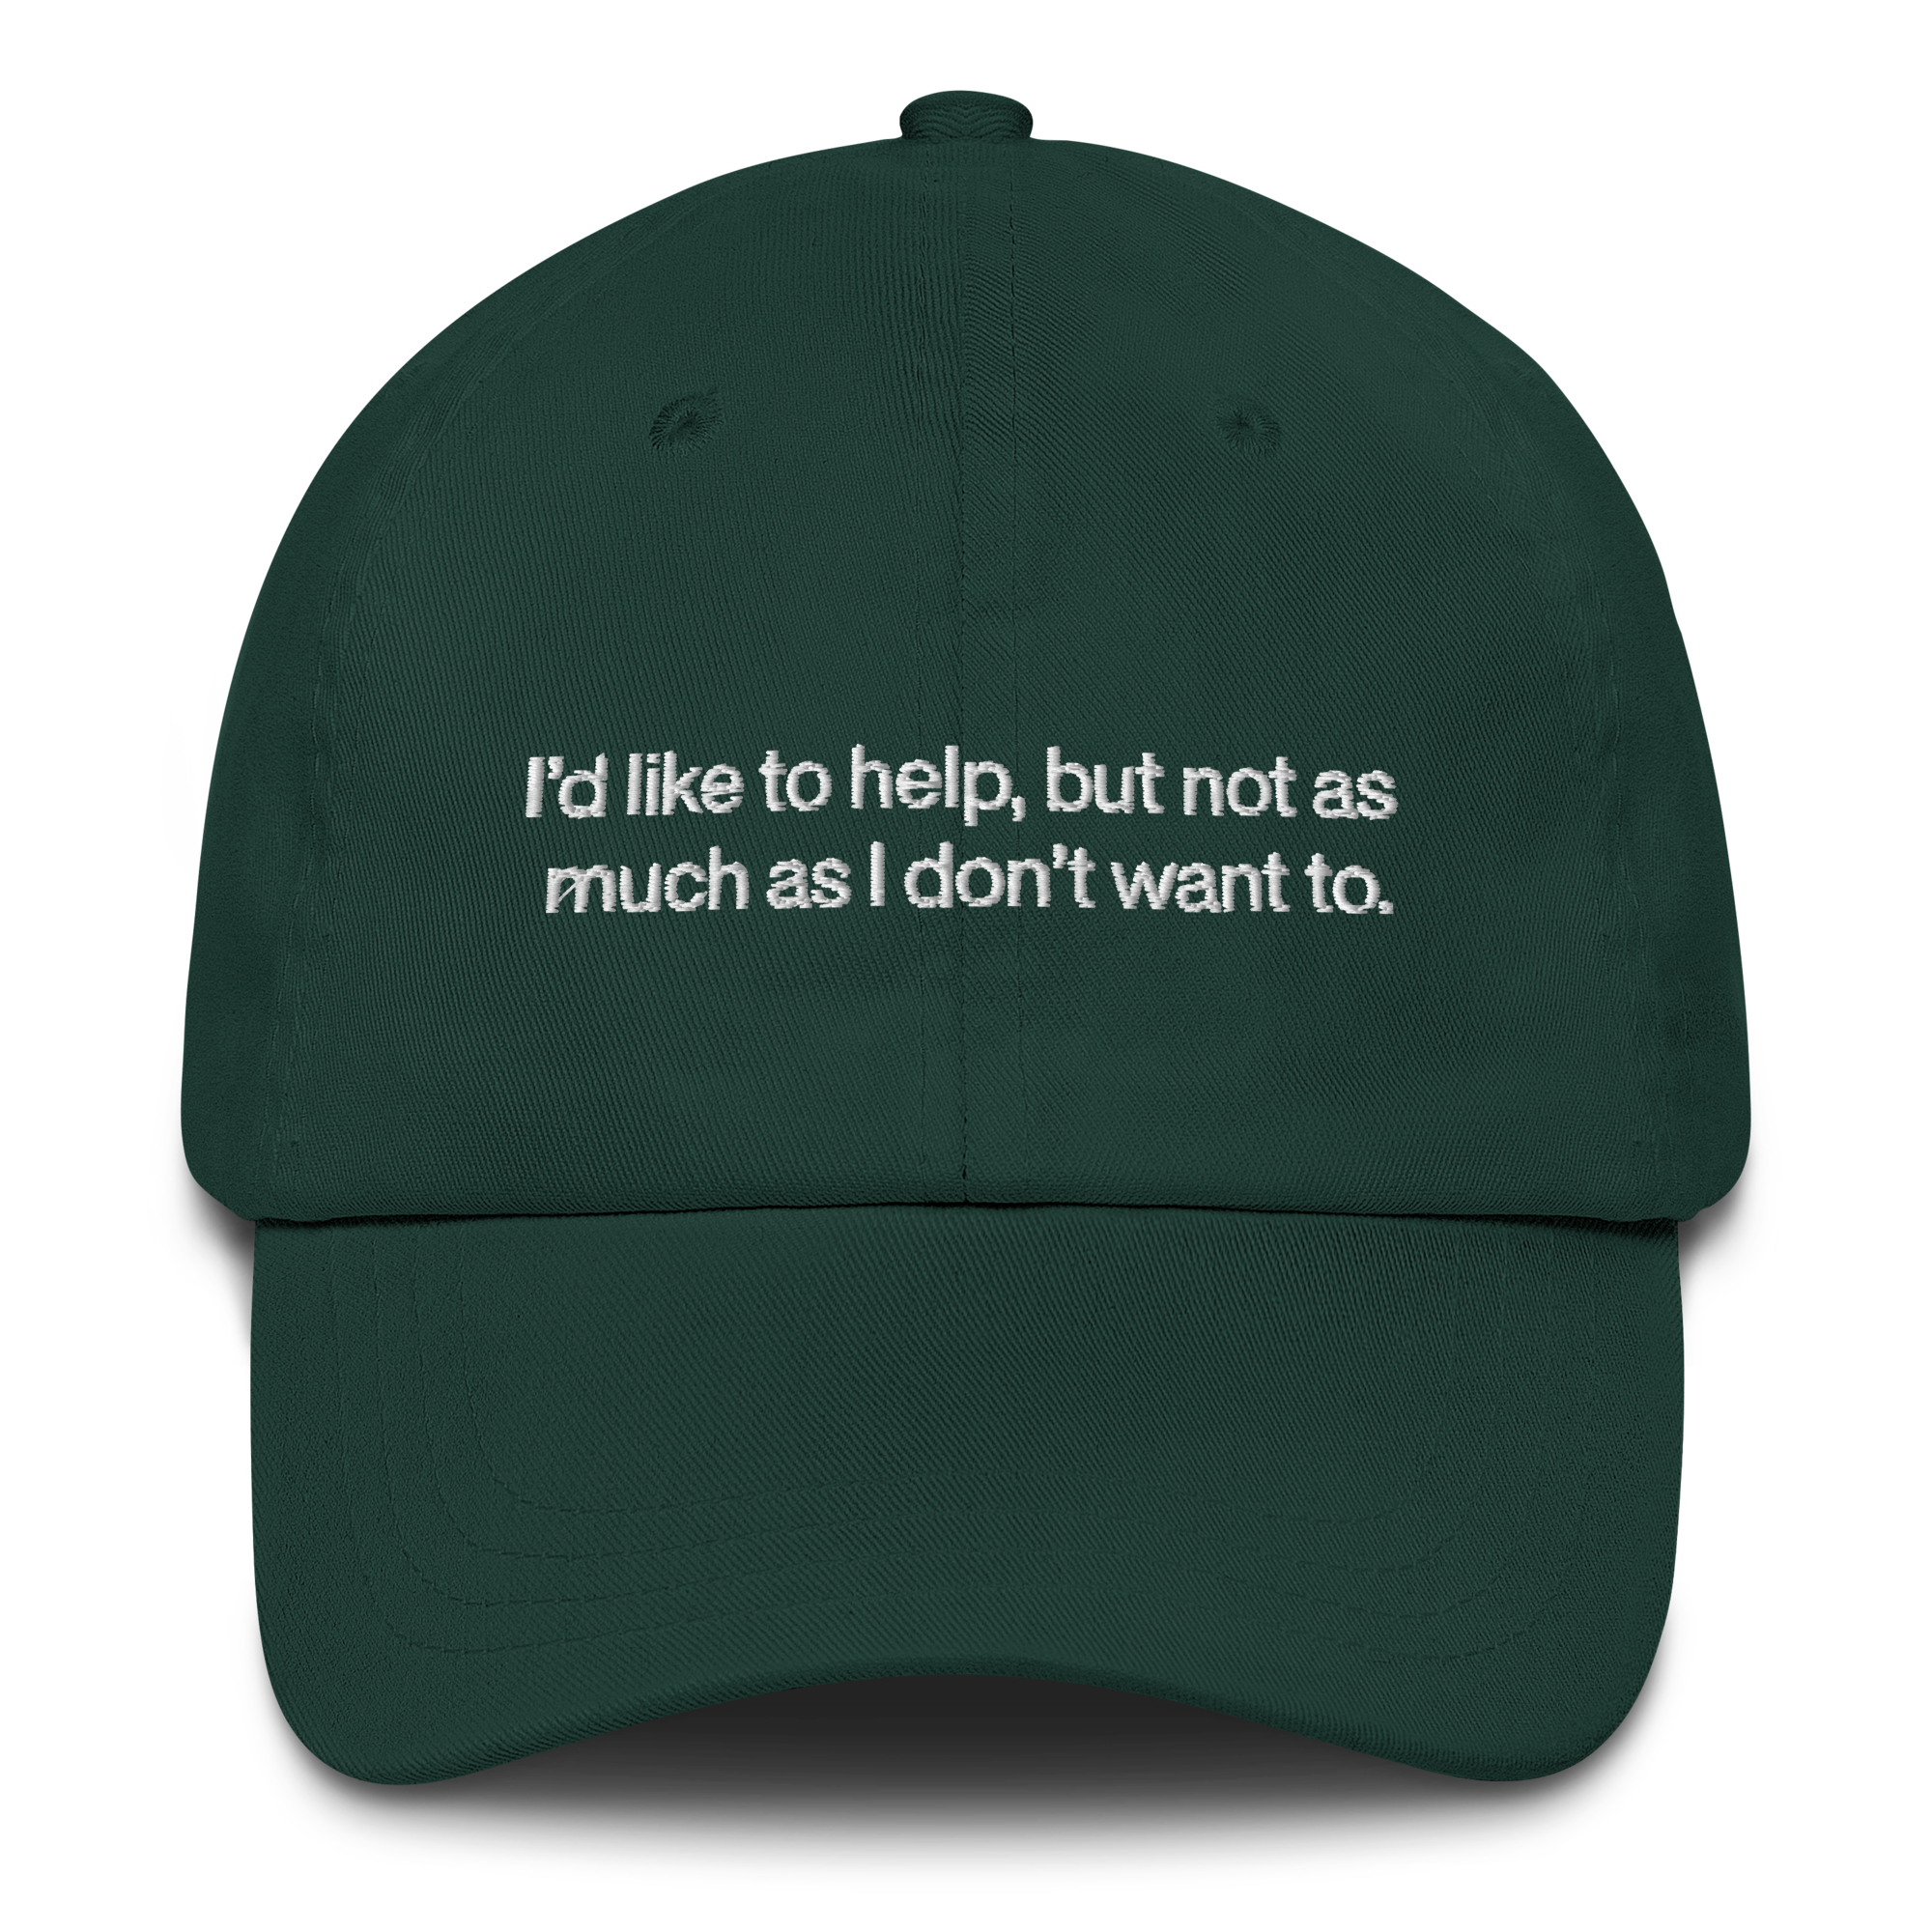 classic-dad-hat-spruce-front-667b26d118083.png